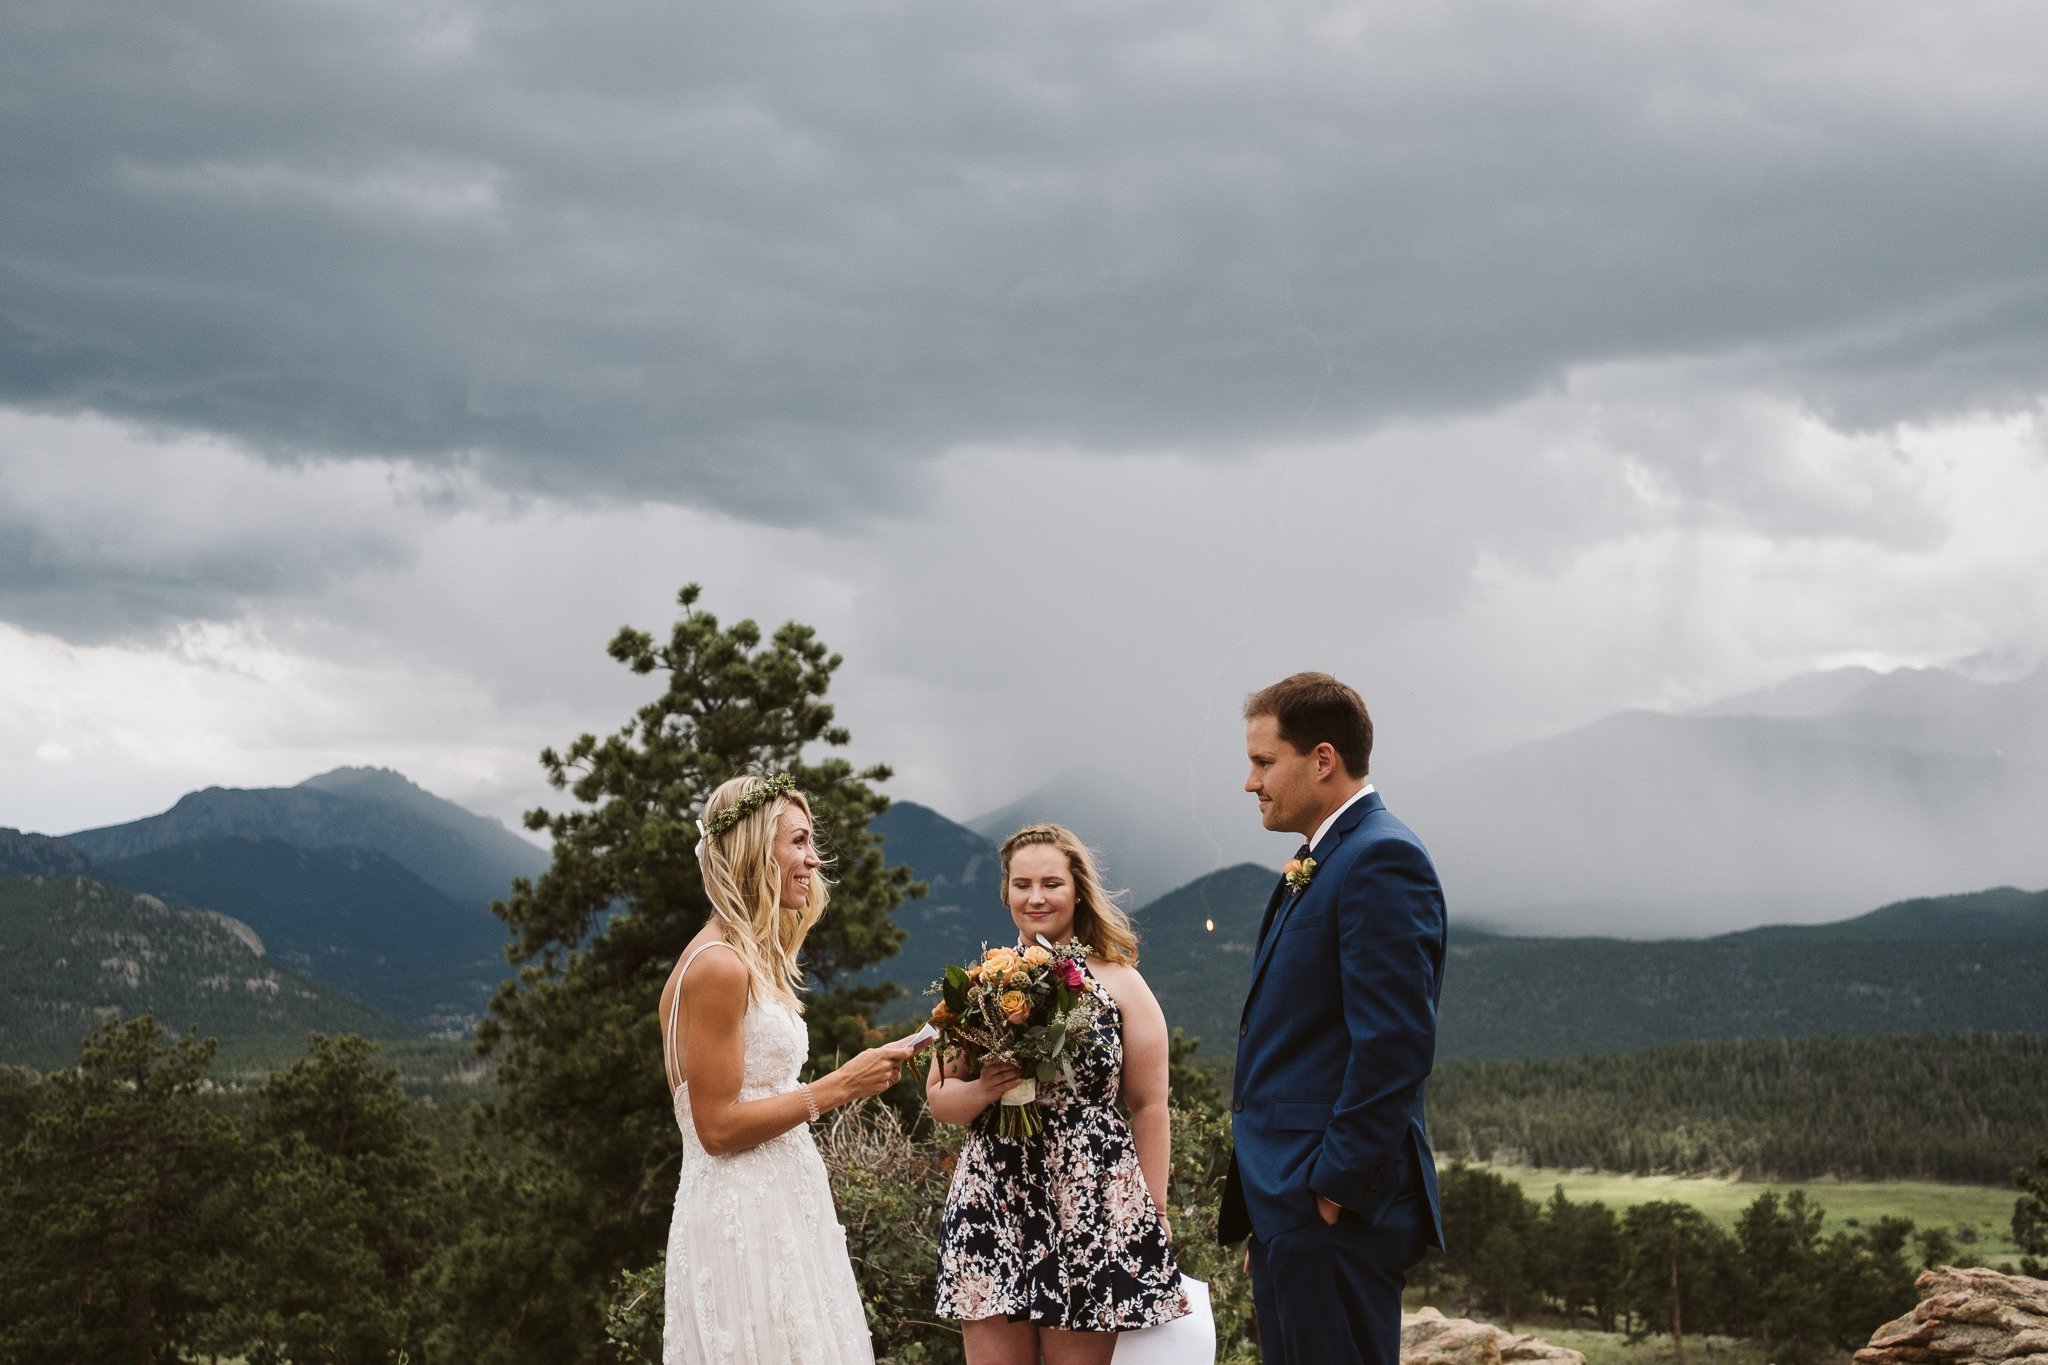 Elopement ceremony at 3M Curve in Rocky Mountain National Park, Colorado elopement photographer